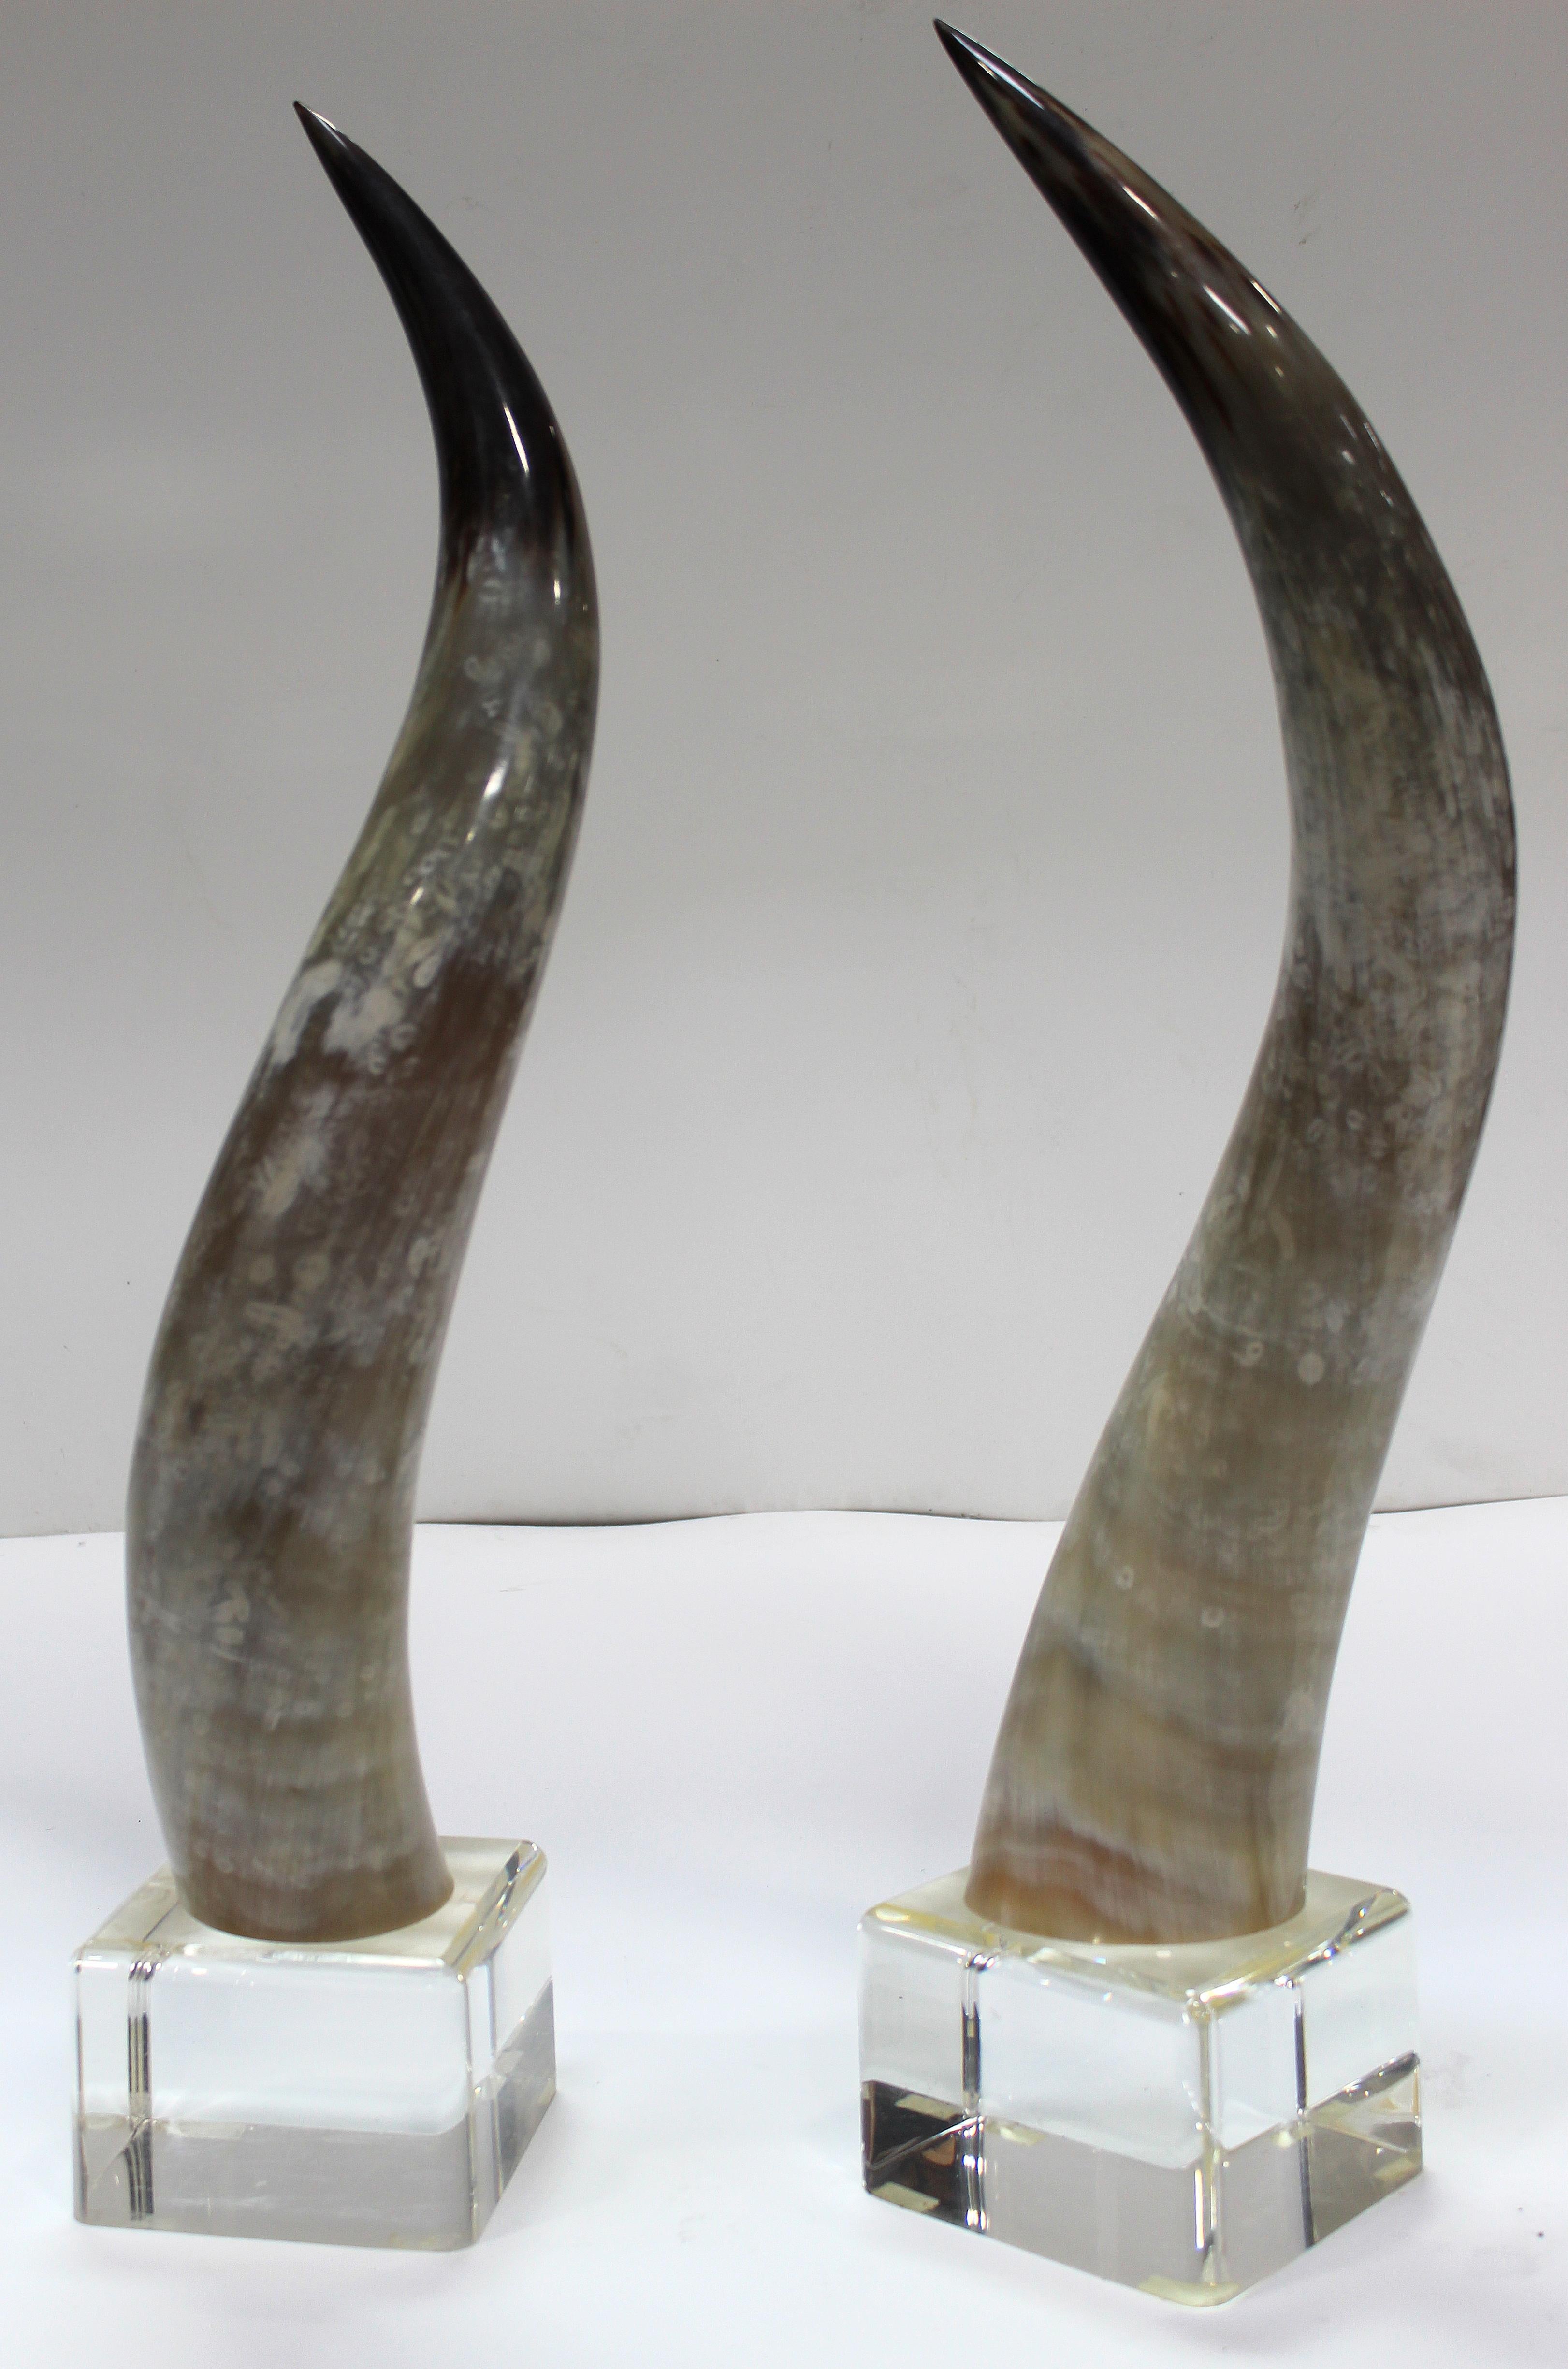 Organic Modern Overscale Longhorn Steer Horns Mounted on Lucite Bases